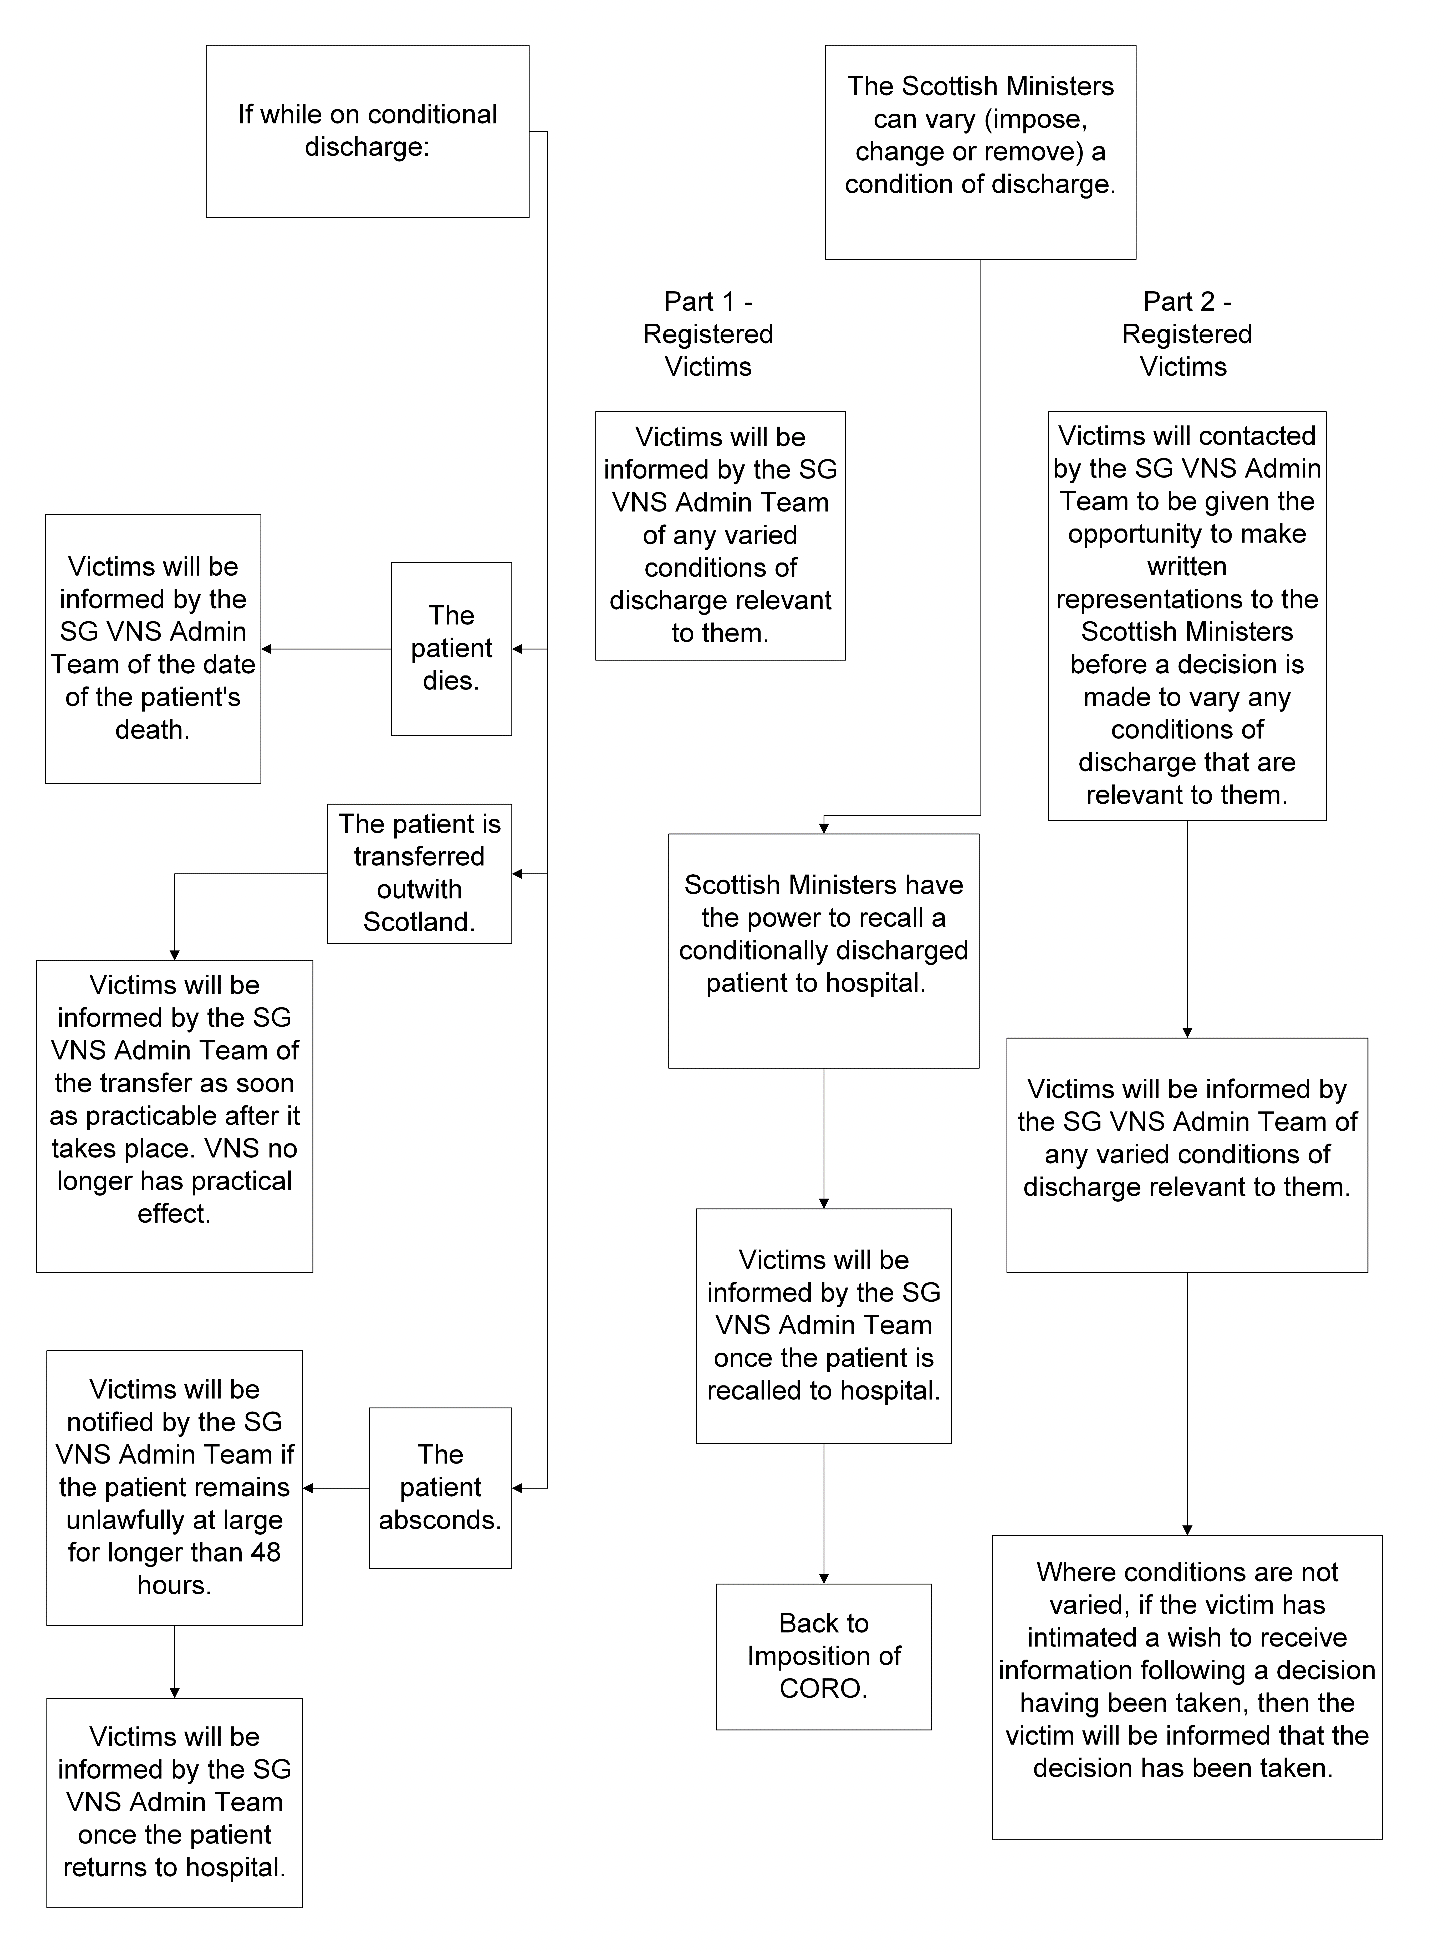 This is a process map for the CORO VNS where there is a conditional discharge or variation of conditions. 
Victims registered on Part 1 will be informed by the SG VNS Admin Team of any varied conditions of discharge that are relevant to them. 
If the patient dies while on conditional discharge, the victim will be told the date of death by the SG VNS Admin Team. 
If the patient is transferred outwith Scotland, the victim will be told as soon as practicable about the transfer after its takes place by the SG VNS Admin Team. The VNS no longer has practical effect after this. 
If the patient absconds, victims will be notified by the SG VNS Admin Team if the patient remains unlawfully at large for longer than 48 hours. Victims will also be informed by the SG VNS Admin Team if the patient returns to hospital. 
The Scottish Ministers can vary (impose, change, or remove) a condition of discharge, and to recall a conditionally discharged patient to hospital. 
Victims will be informed by the SG VNS Admin Team once the patient is recalled to hospital. This means the CORO is imposed again. 
Victims registered on Part 2 will be contacted by the SG VNS Admin Team to be given the opportunity to make written representations to the Scottish Ministers before a decision is made to vary any conditions of discharge that are relevant to them. 
Victims will be informed by the SG VNS Admin Team of any varied conditions of discharge that are relevant to them. 
Where conditions are not varied, if the victim has intimated a wish to receive information following a decision having been taken, then the victim will be informed that the decision has been taken.
